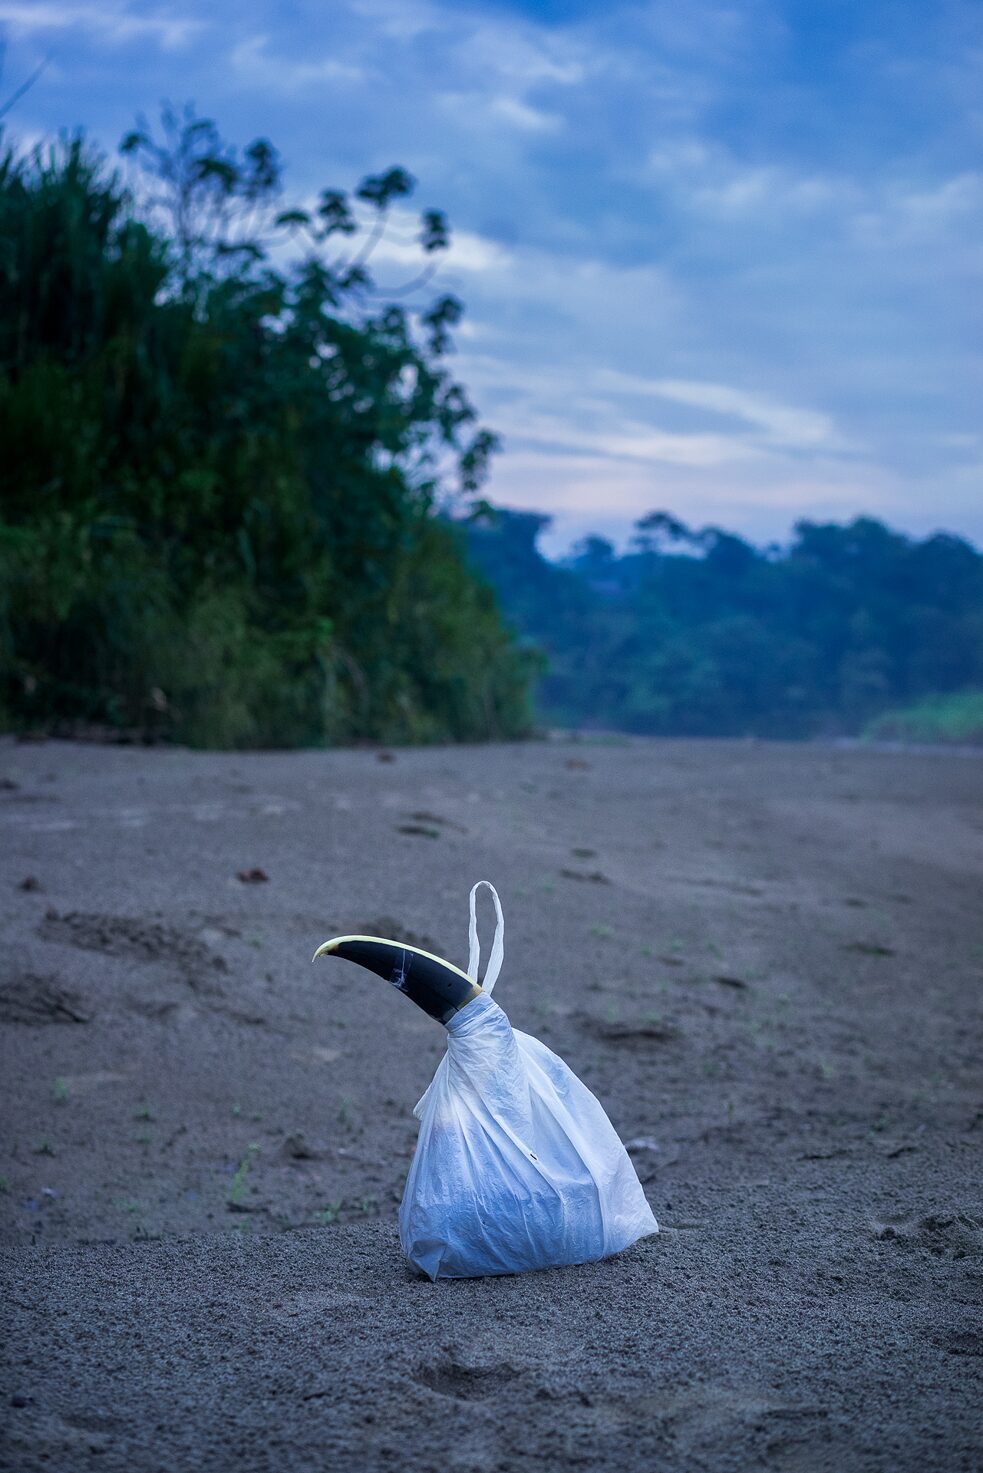 A hat made from a toucan beak, sitting in a plastic bag along the shore of the Bobonaza River.